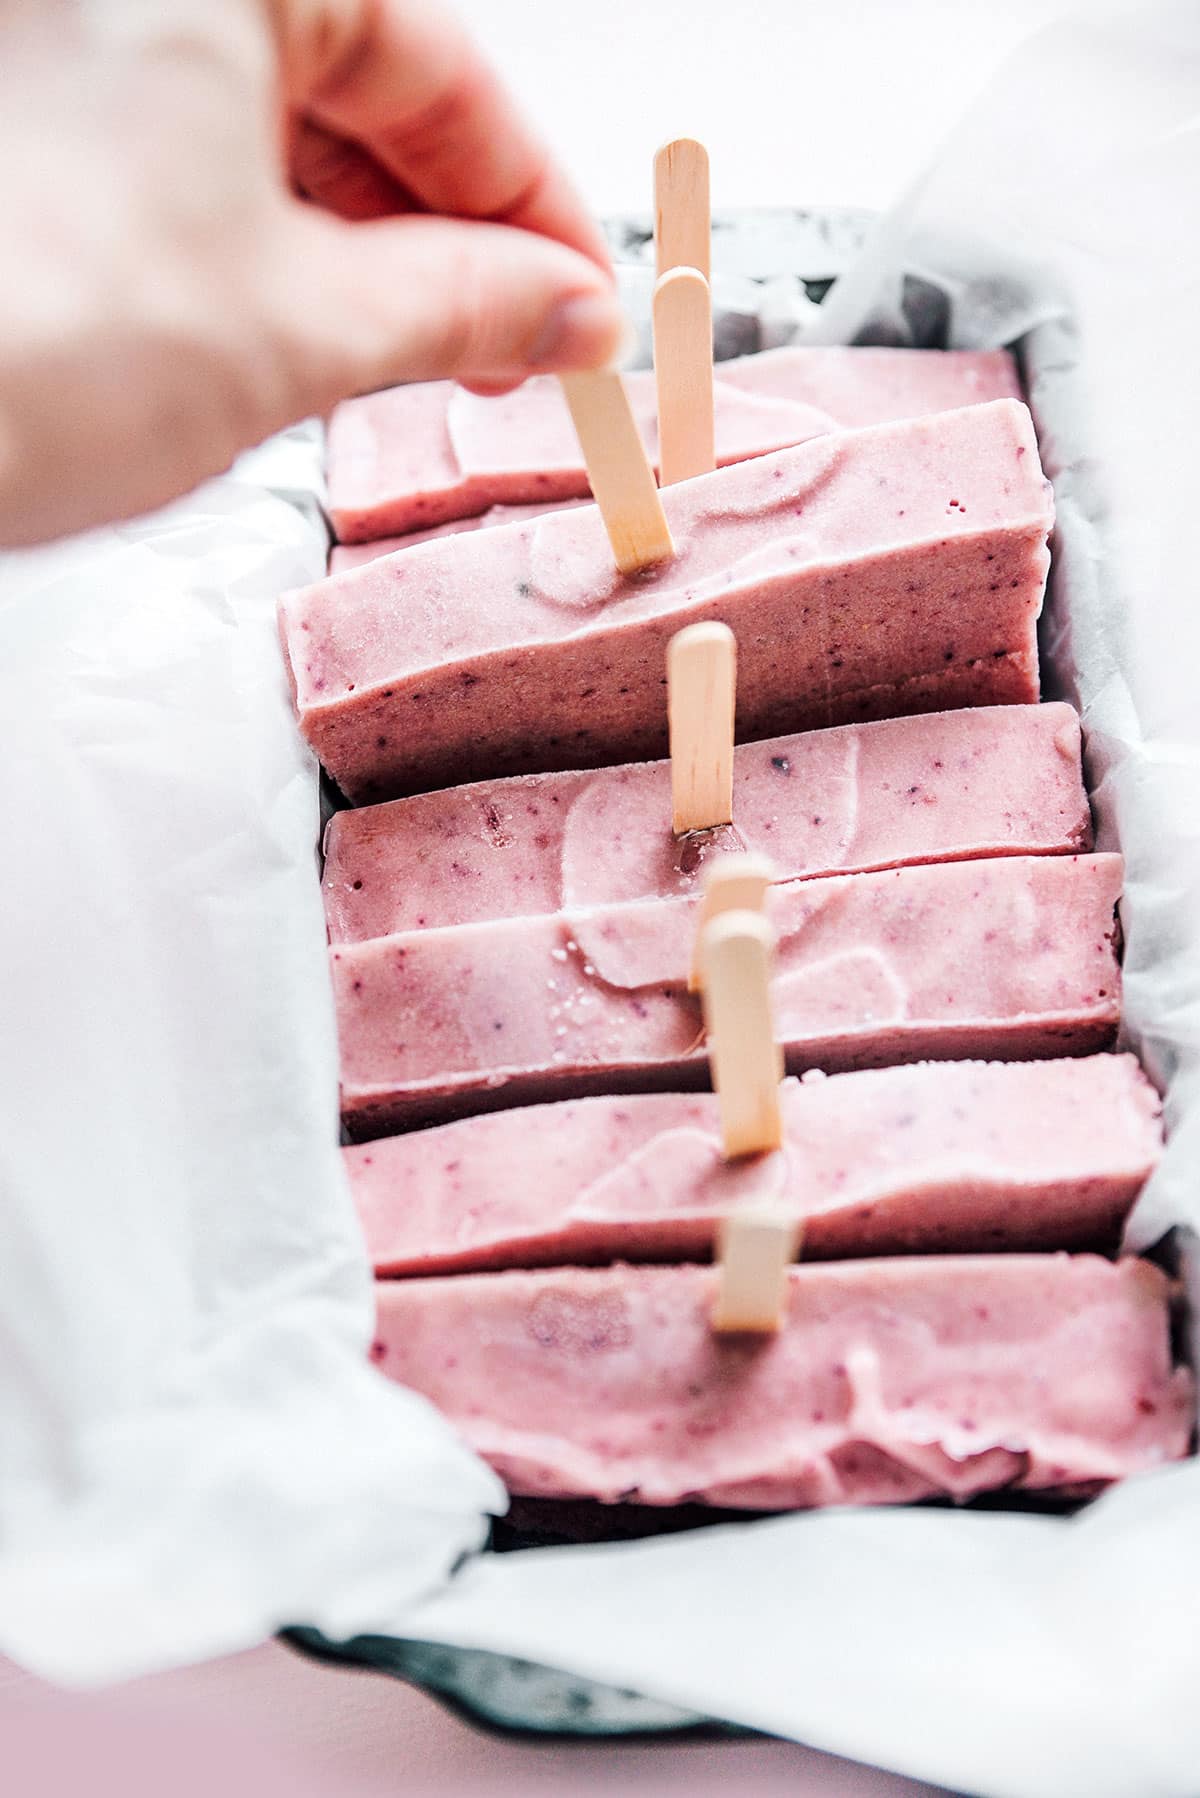 DIY popsicle mold idea with sliceable homemade popsicles in a loaf pan